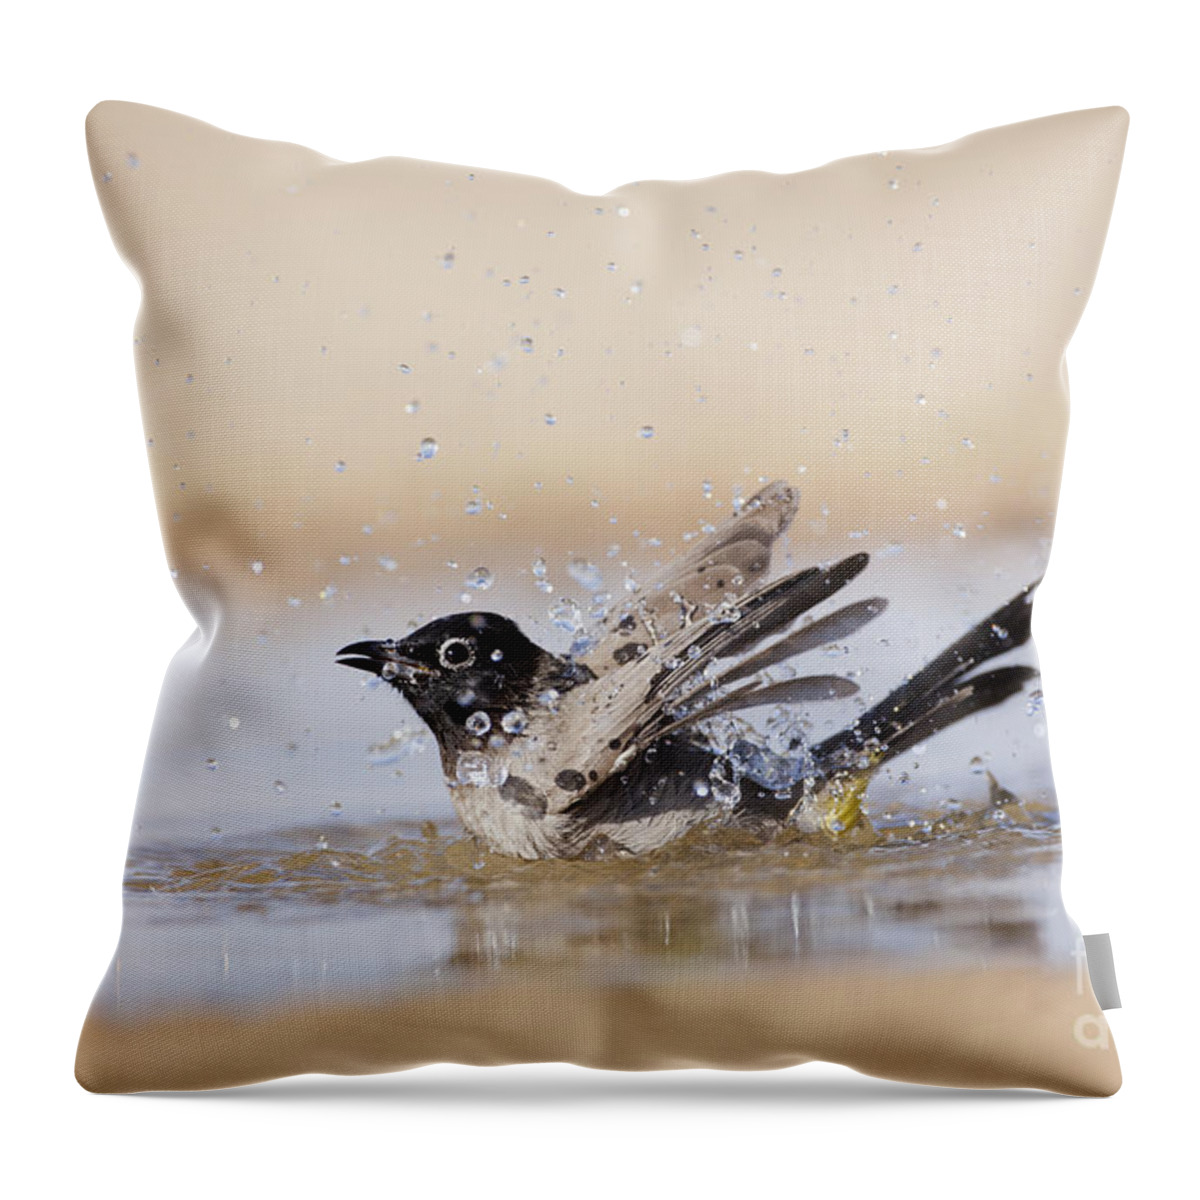 Ornithology Throw Pillow featuring the photograph Yellow-vented Bulbul by Eyal Bartov